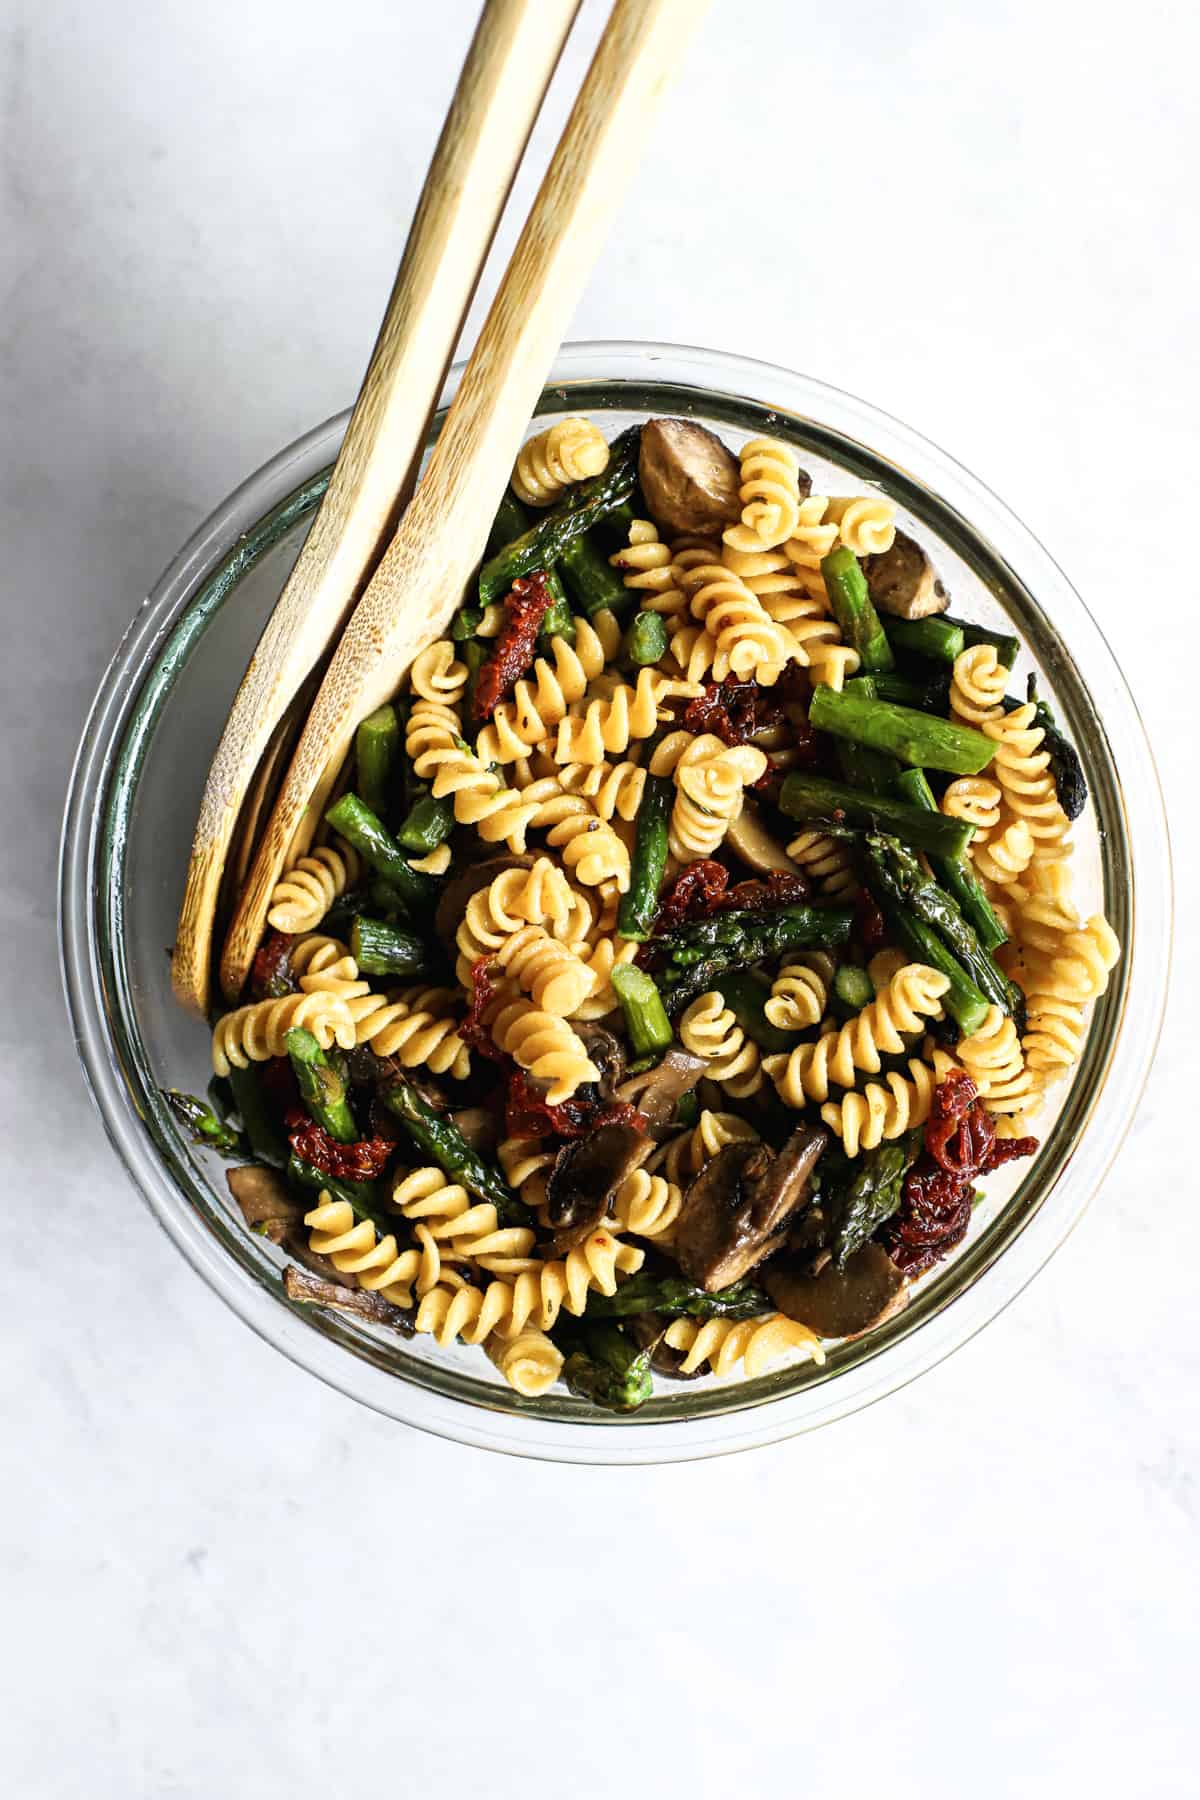 Roasted mushrooms, asparagus, sun-dried tomatoes, and rotini tossed together in clear glass bowl with two wooden spoons on gray/white surface